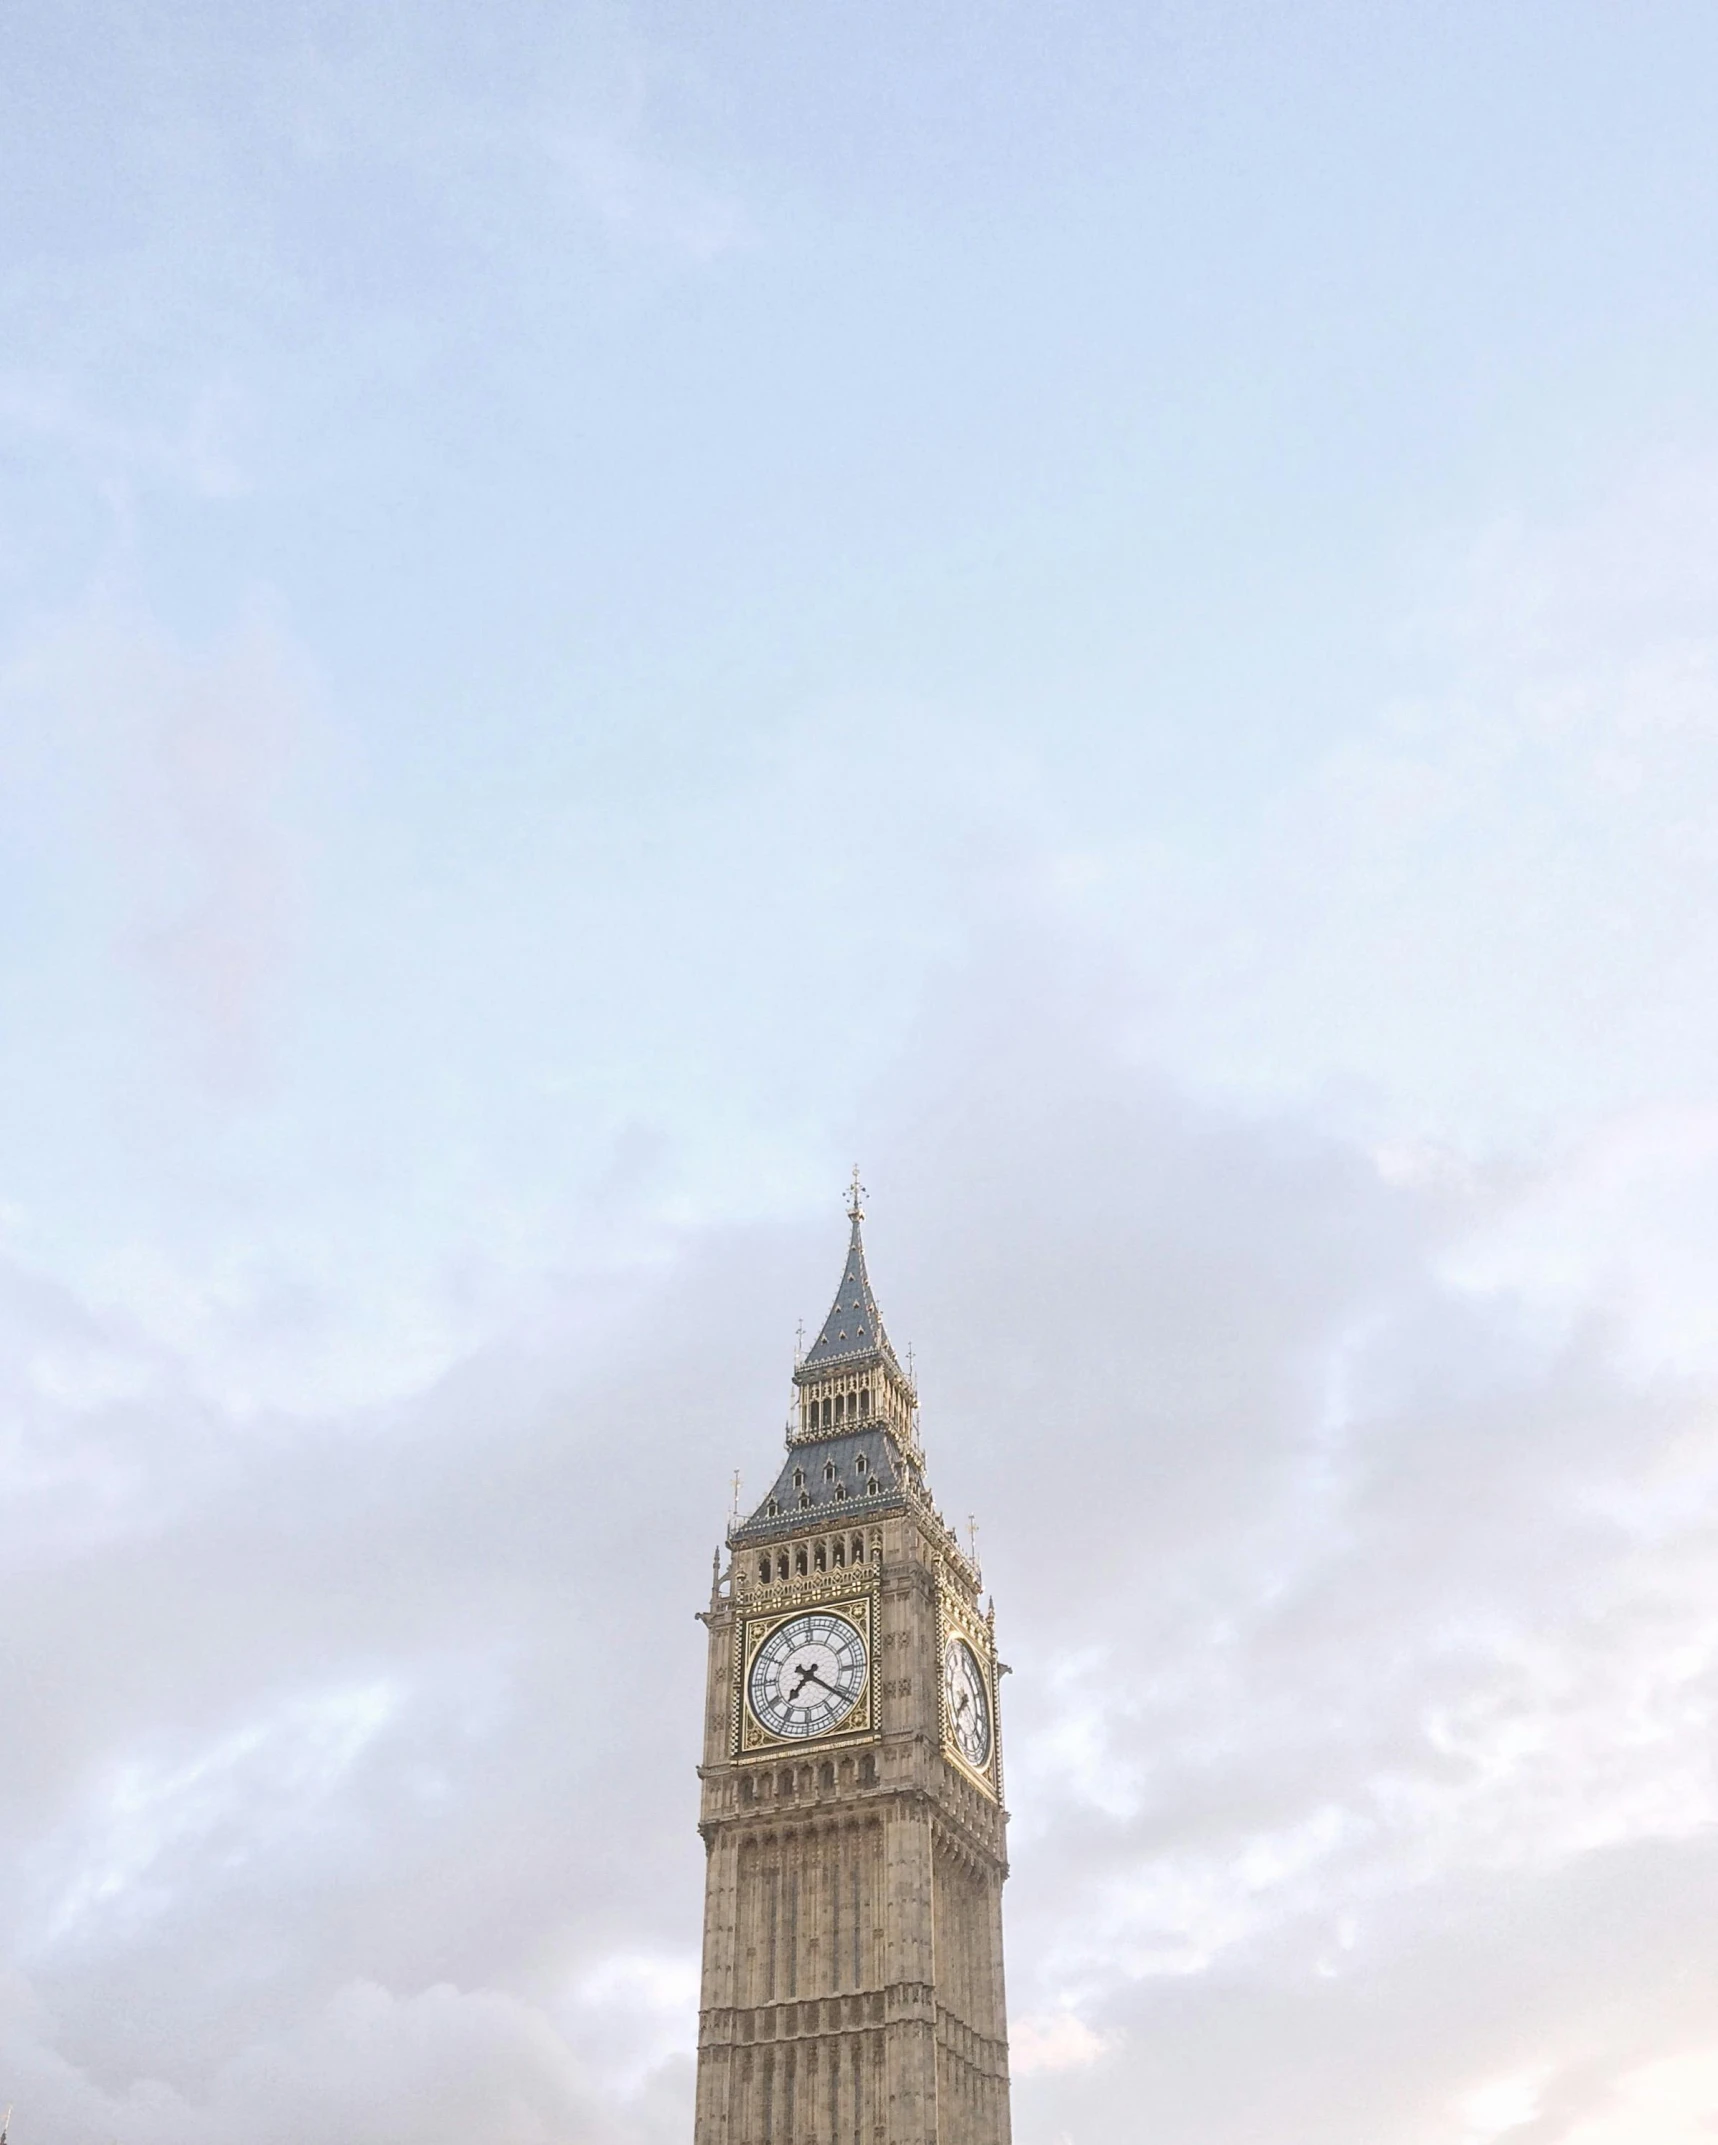 the big ben clock tower towering over the city of london, trending on unsplash, romanticism, minimalist photo, 🚿🗝📝, lgbtq, vogue cover photo